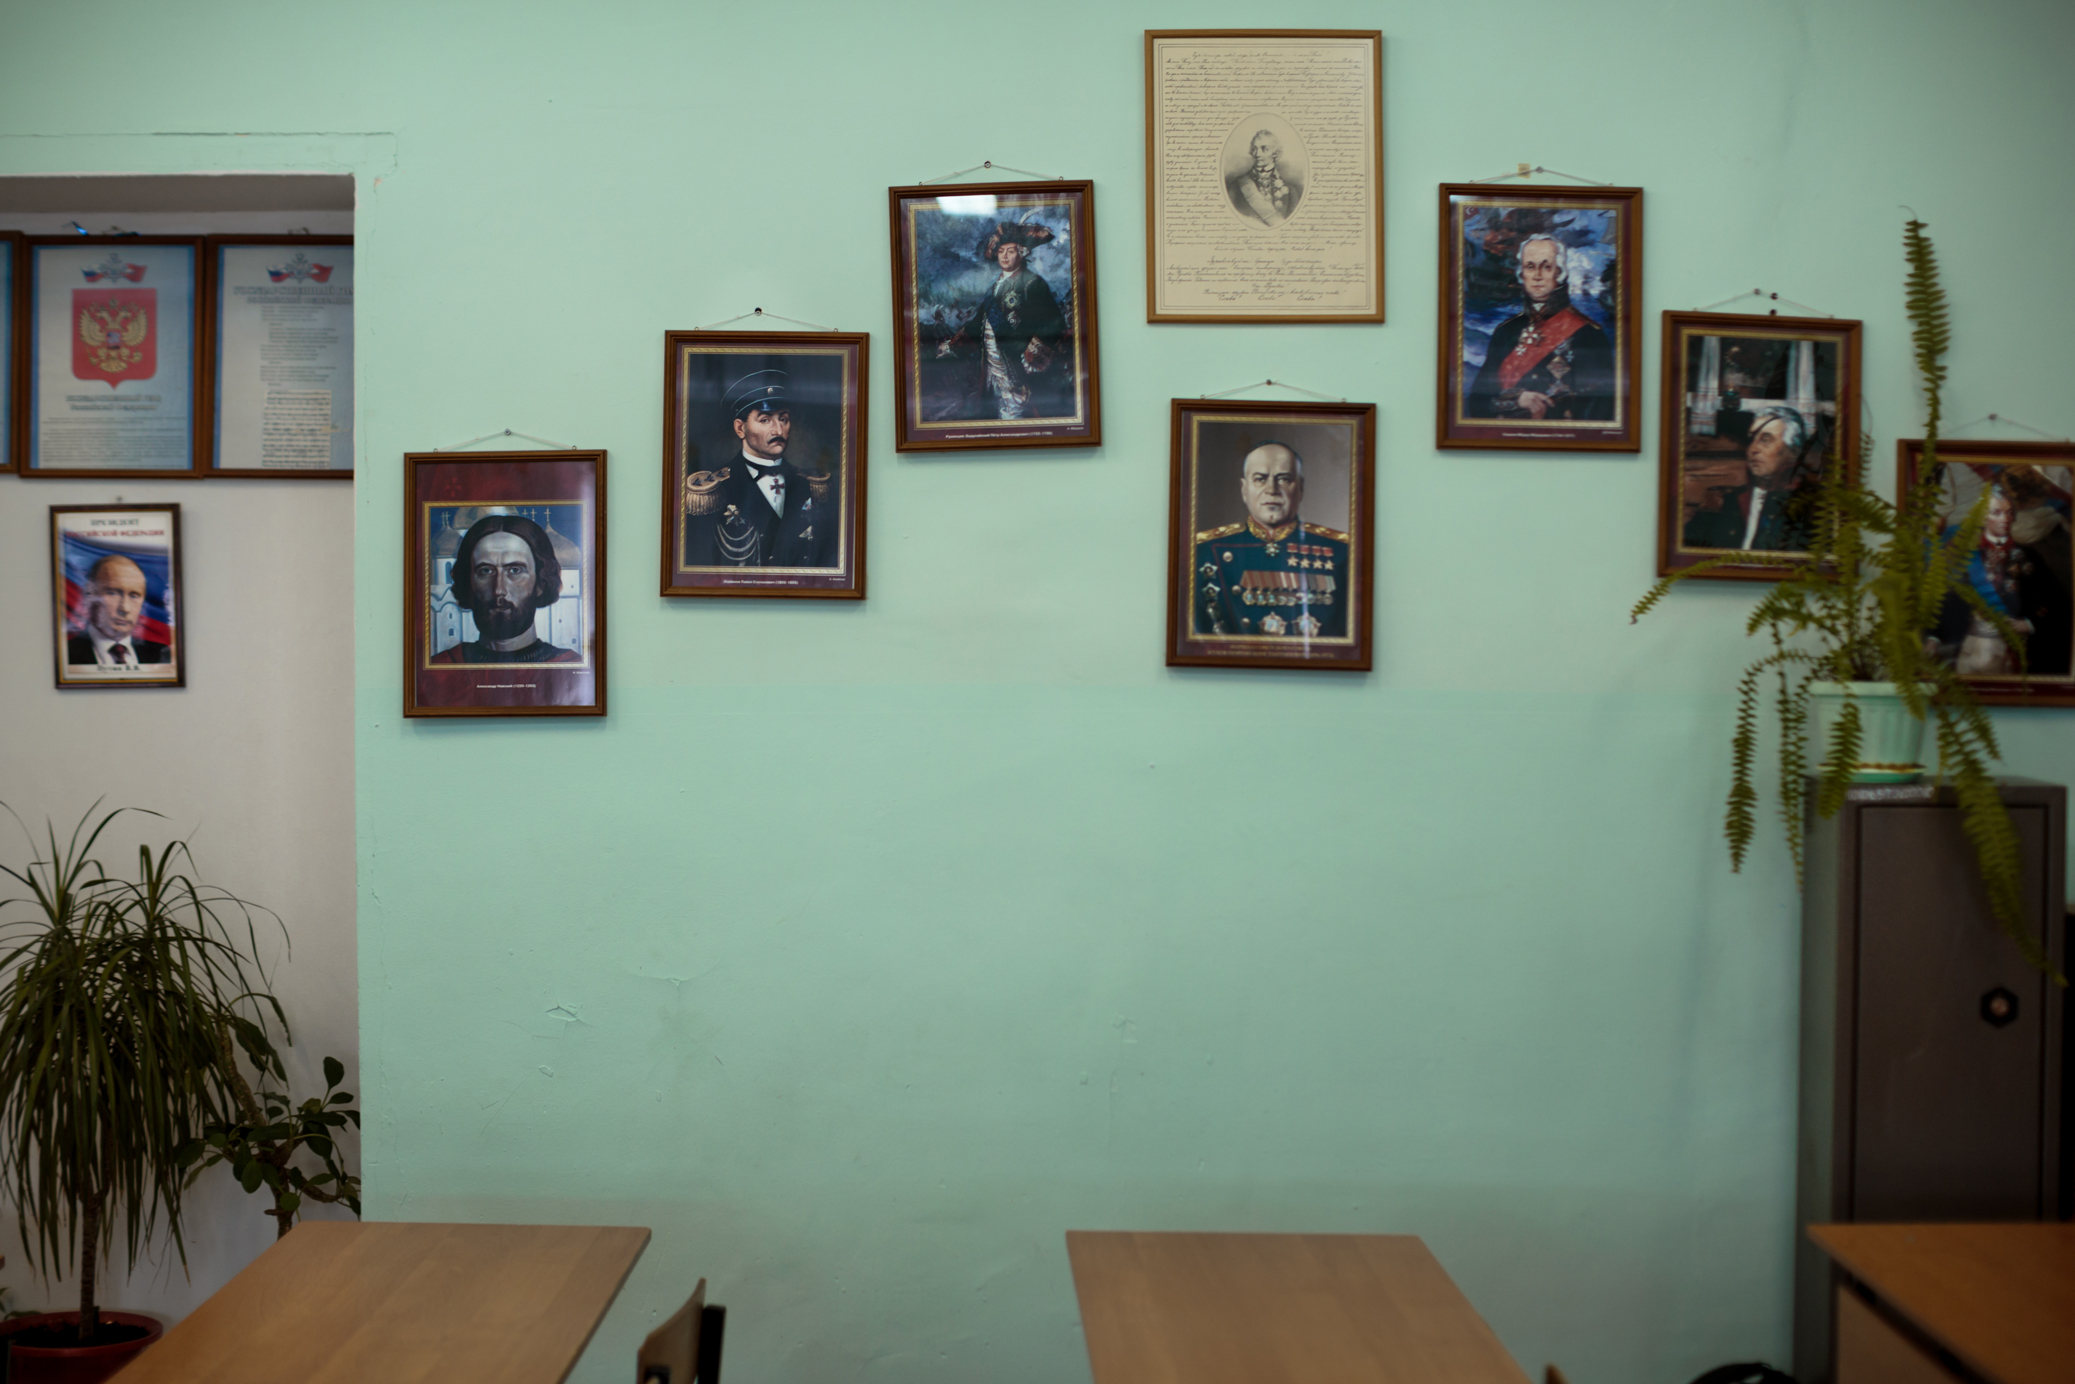 A classroom wall at School #7 decorated with legacies from Russian history, starting with Vladimir Putin on the far left.